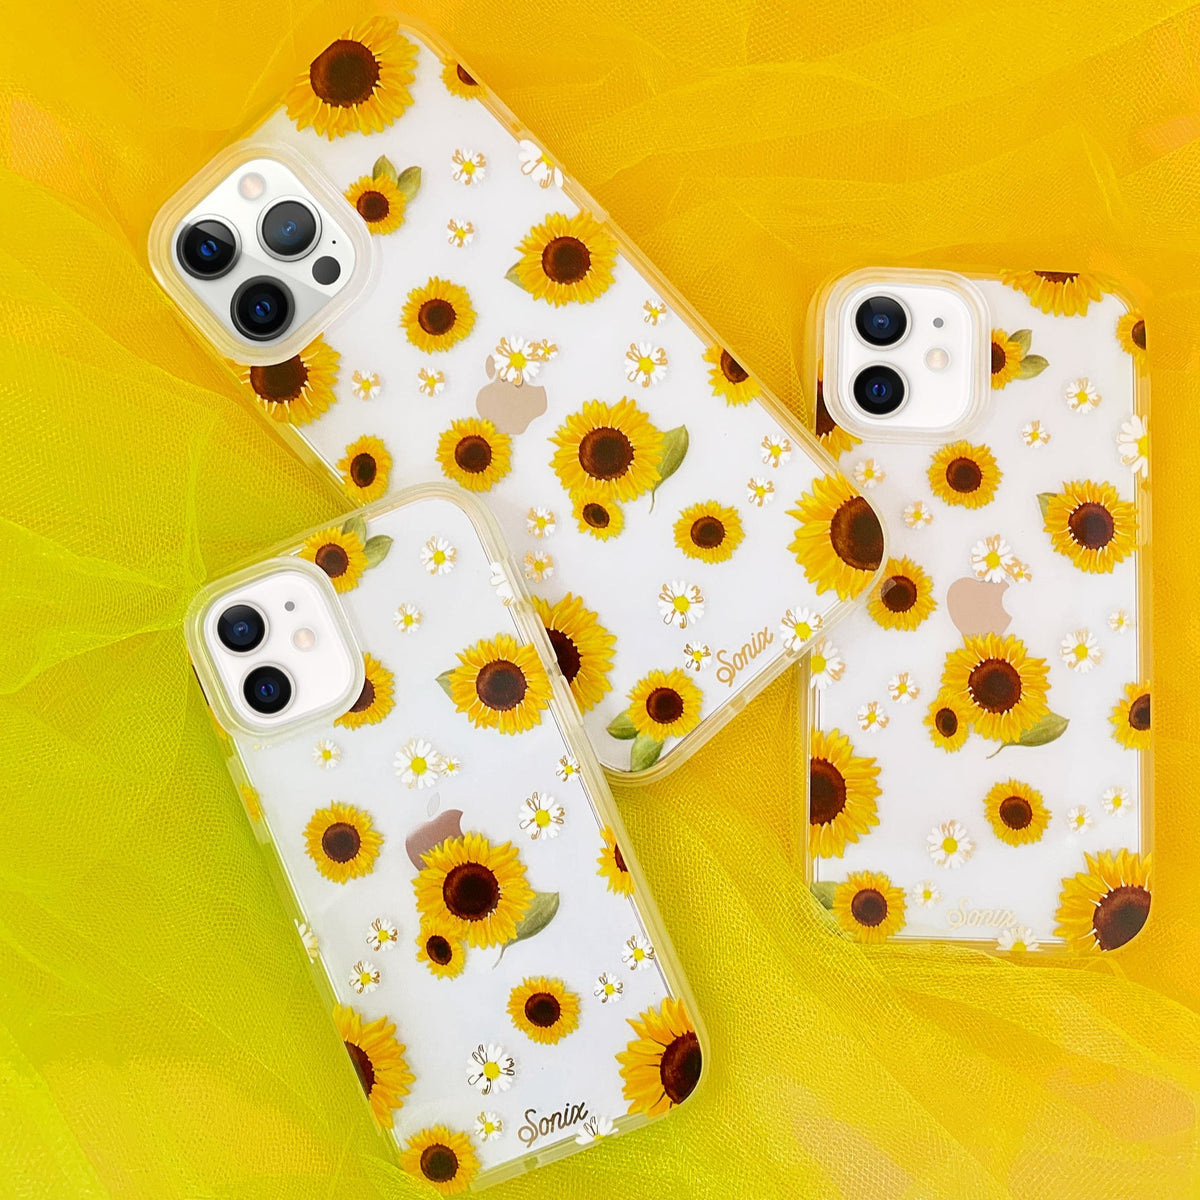 iPhone 12 Pro Max Silicone Case with MagSafe - Sunflower